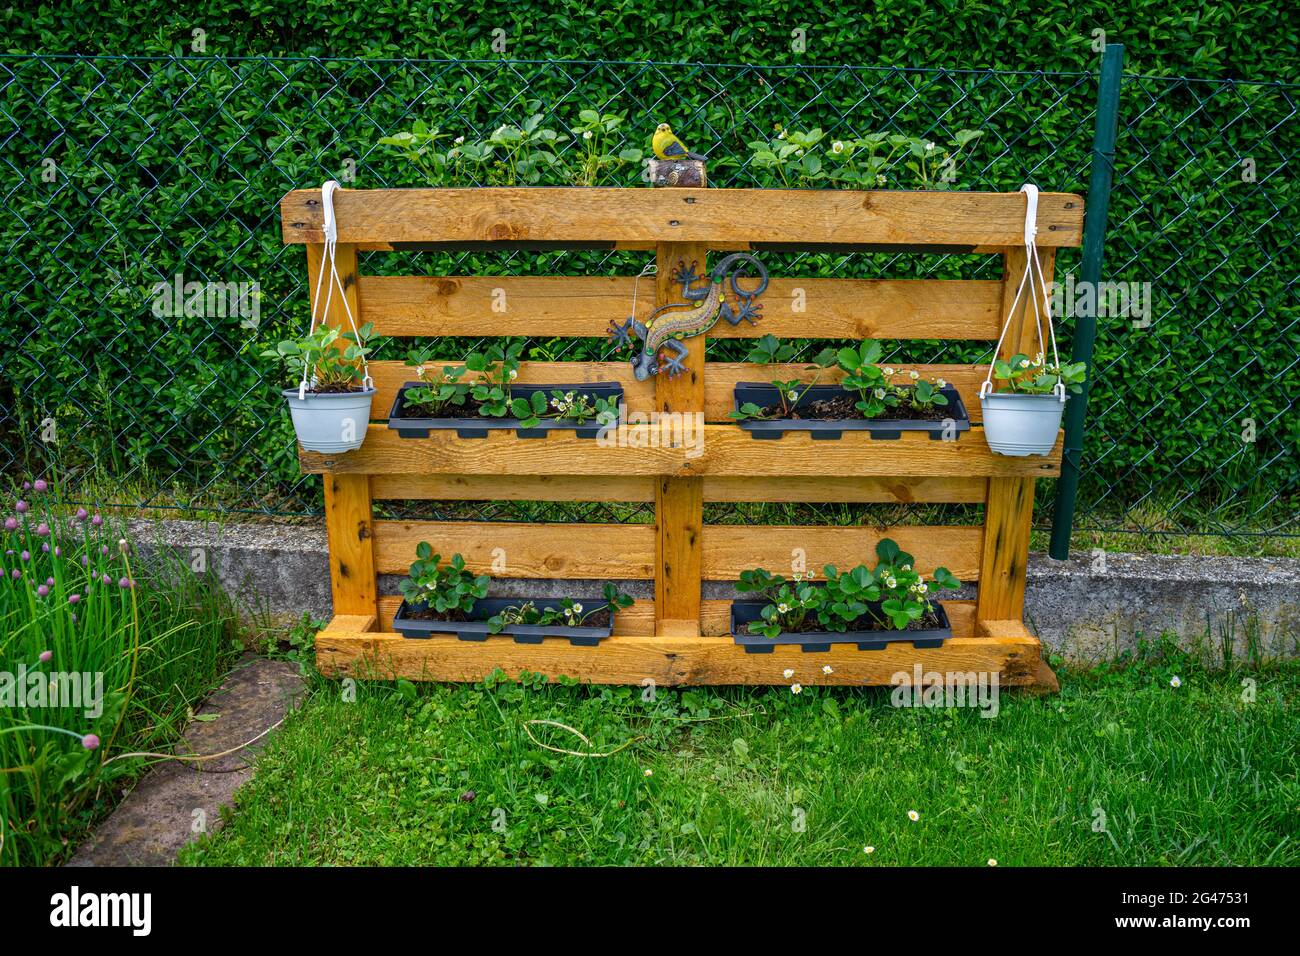 Gardening planting Strawberries on a Pallette in Lower Bavaria Germany Stock Photo